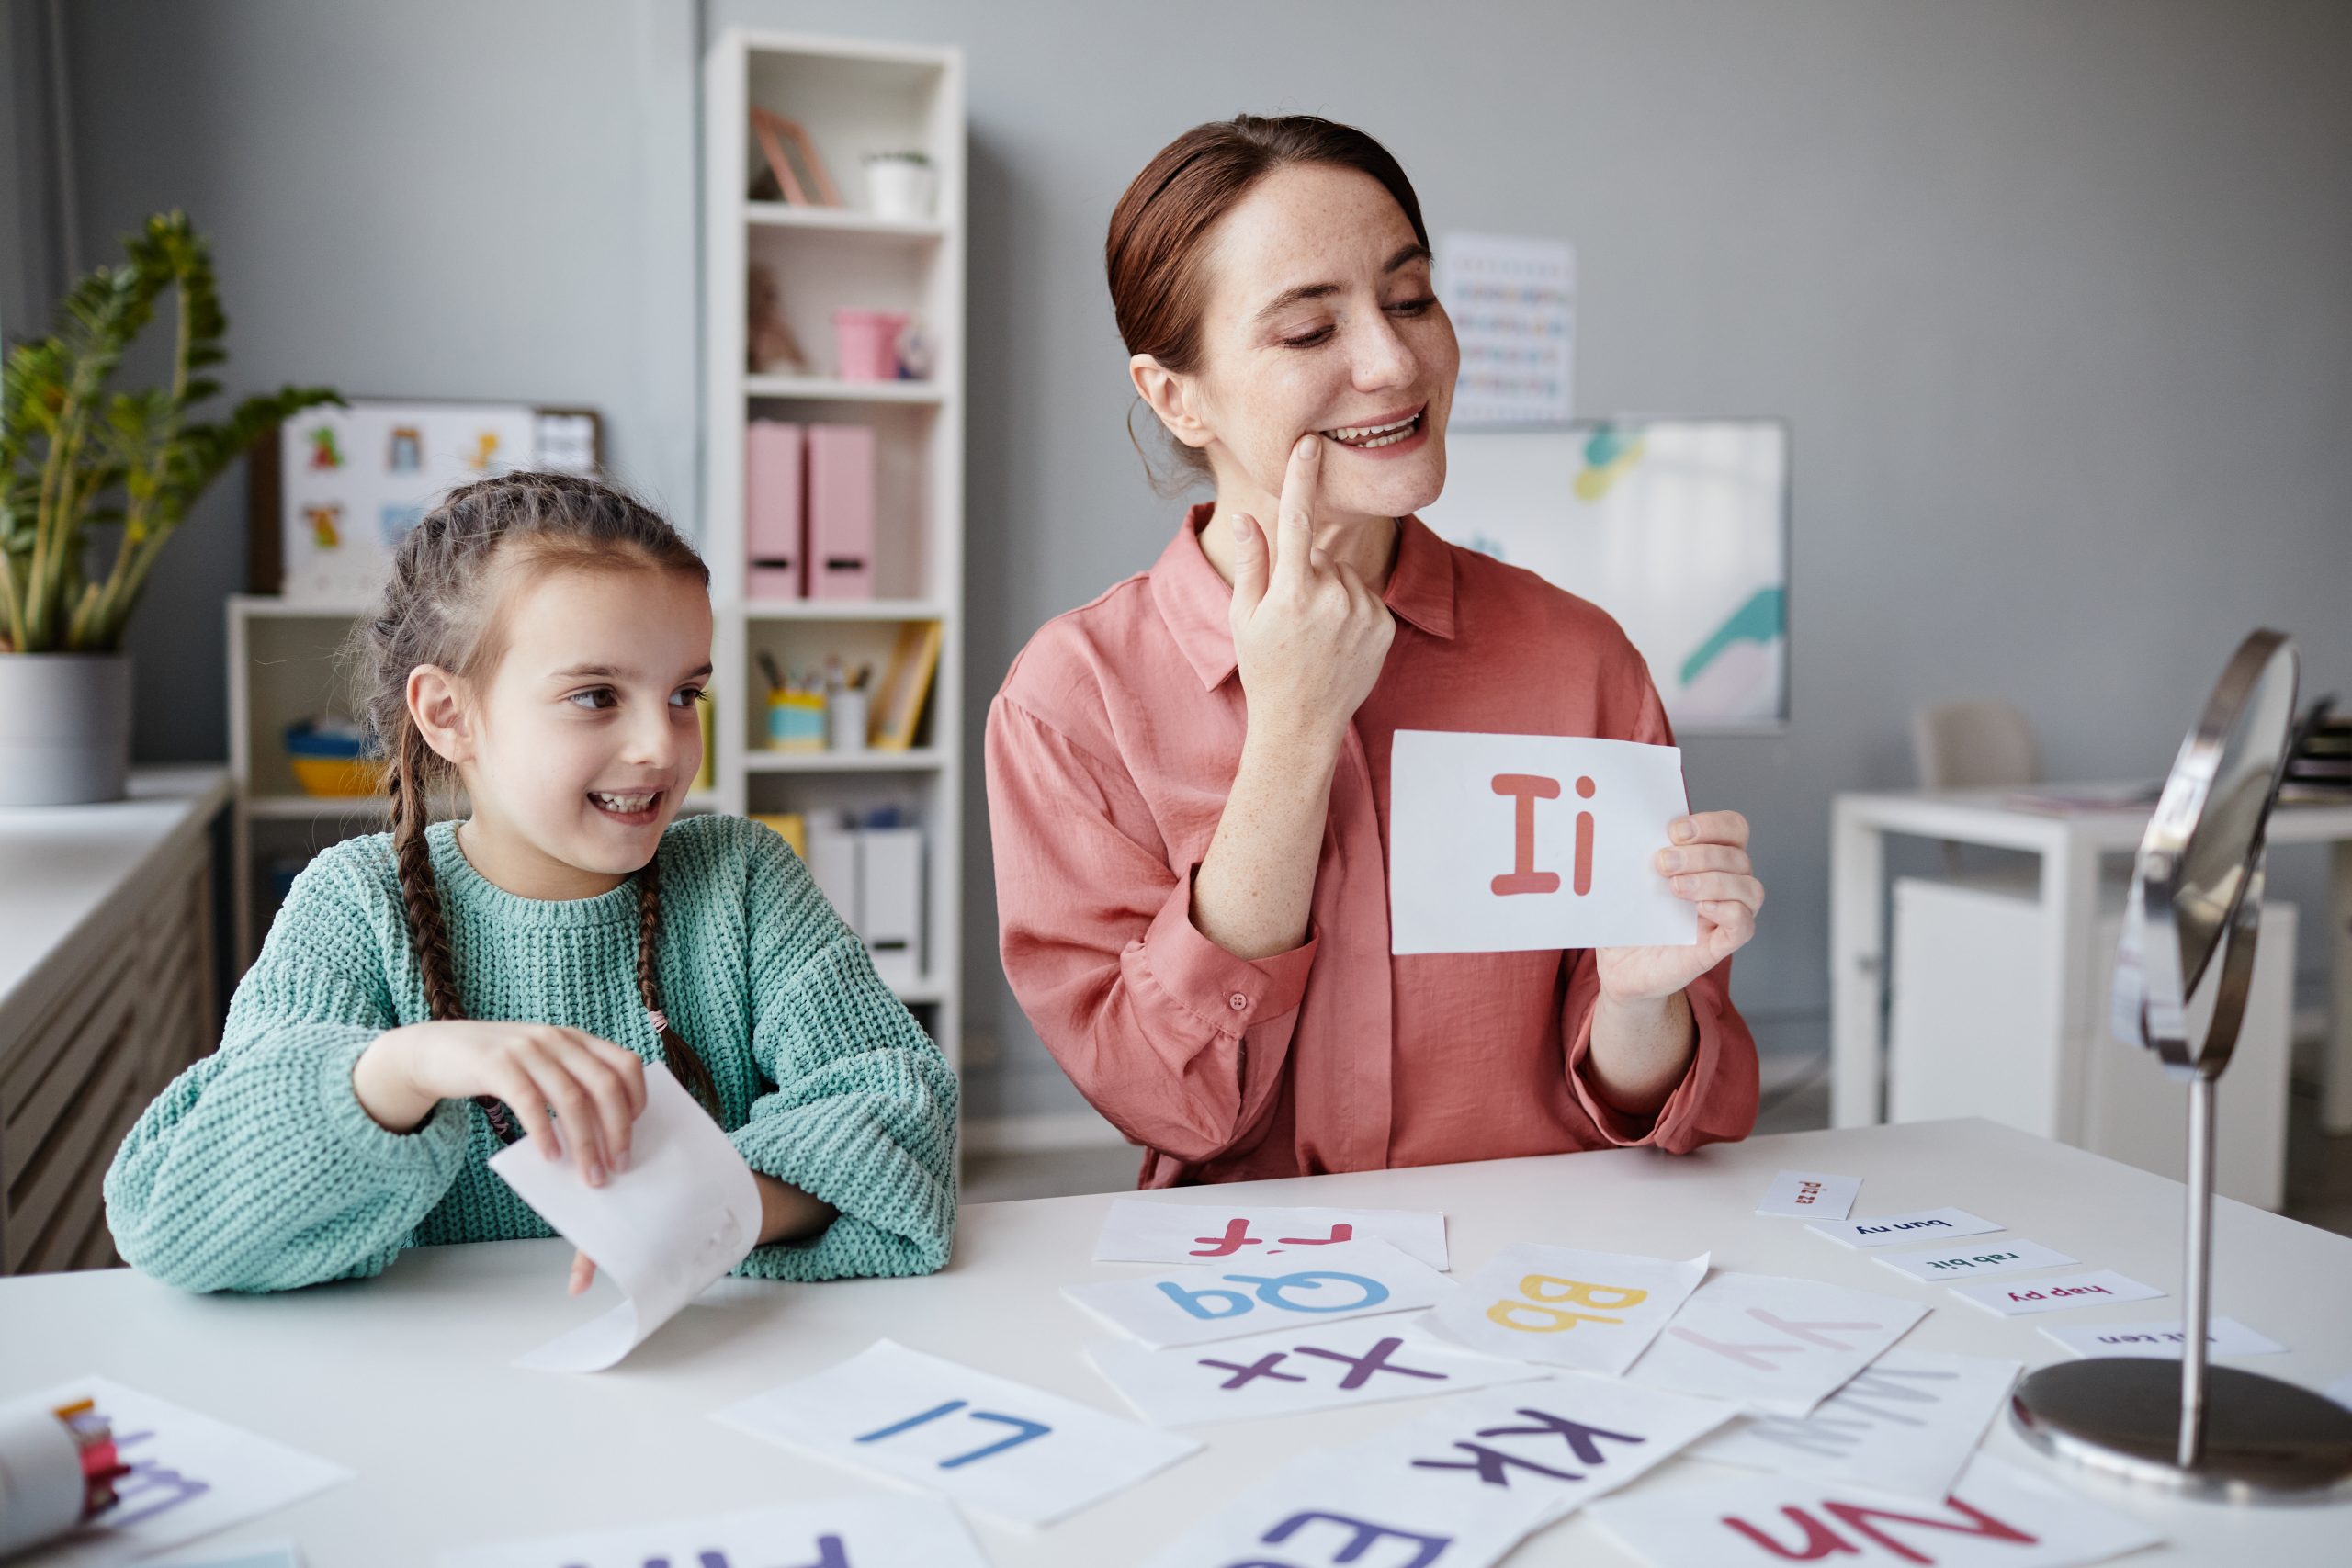 speech therapy exercises for kids its importance